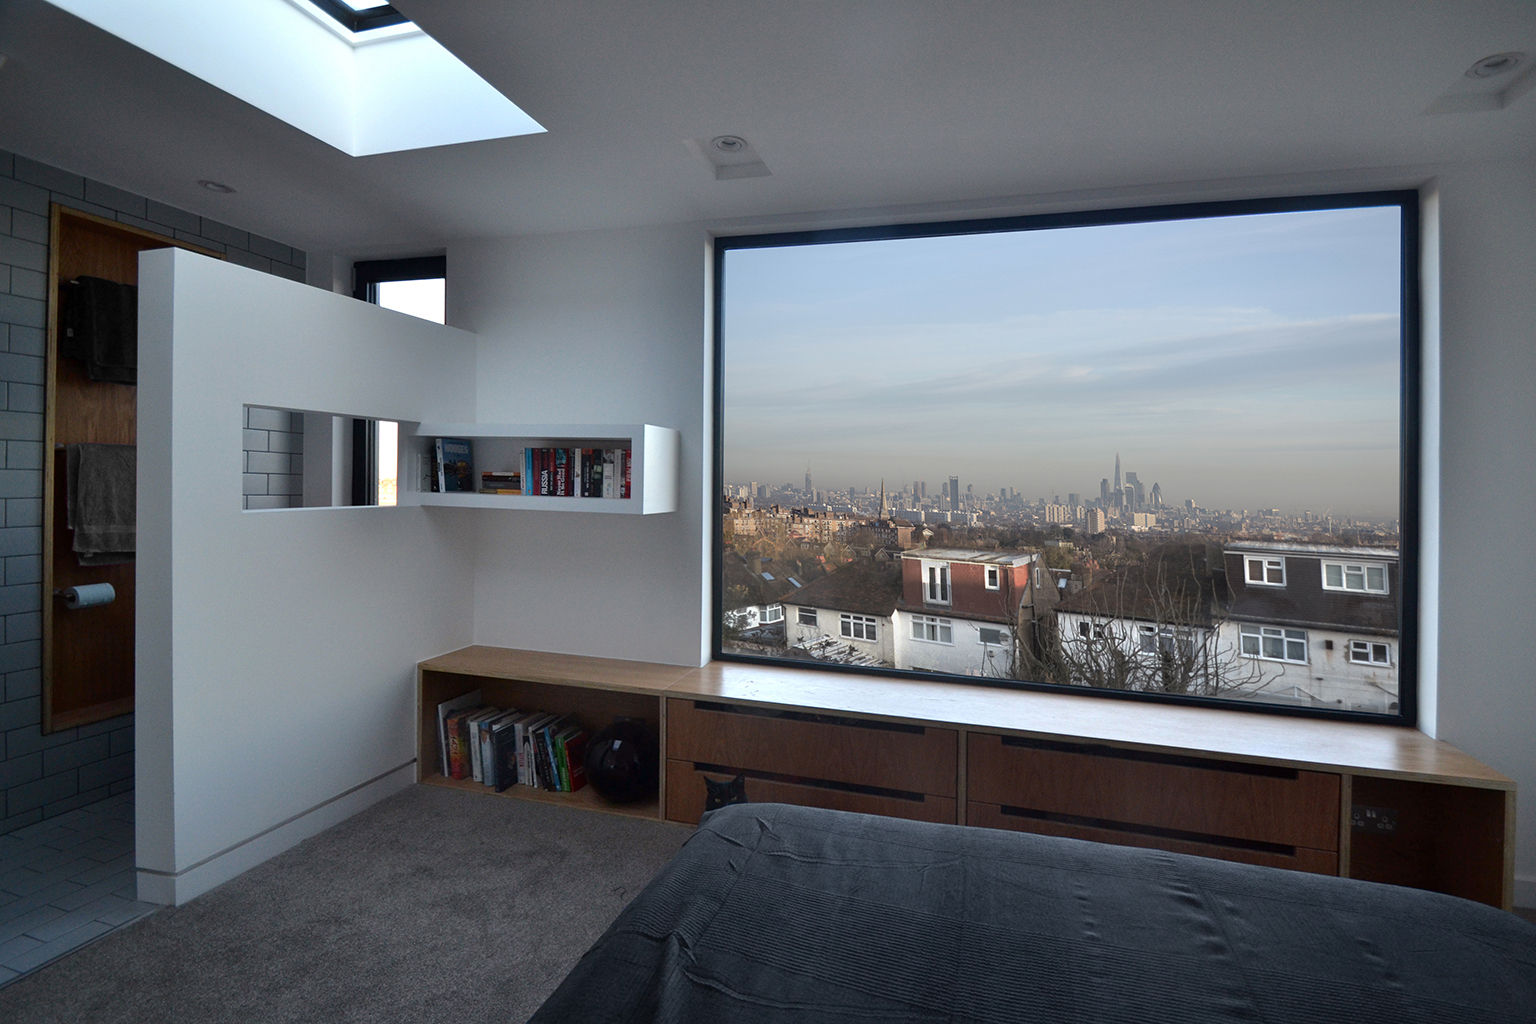 Broxholm Road - Loft extension interior photograph of bedroom and view Selencky///Parsons غرفة نوم